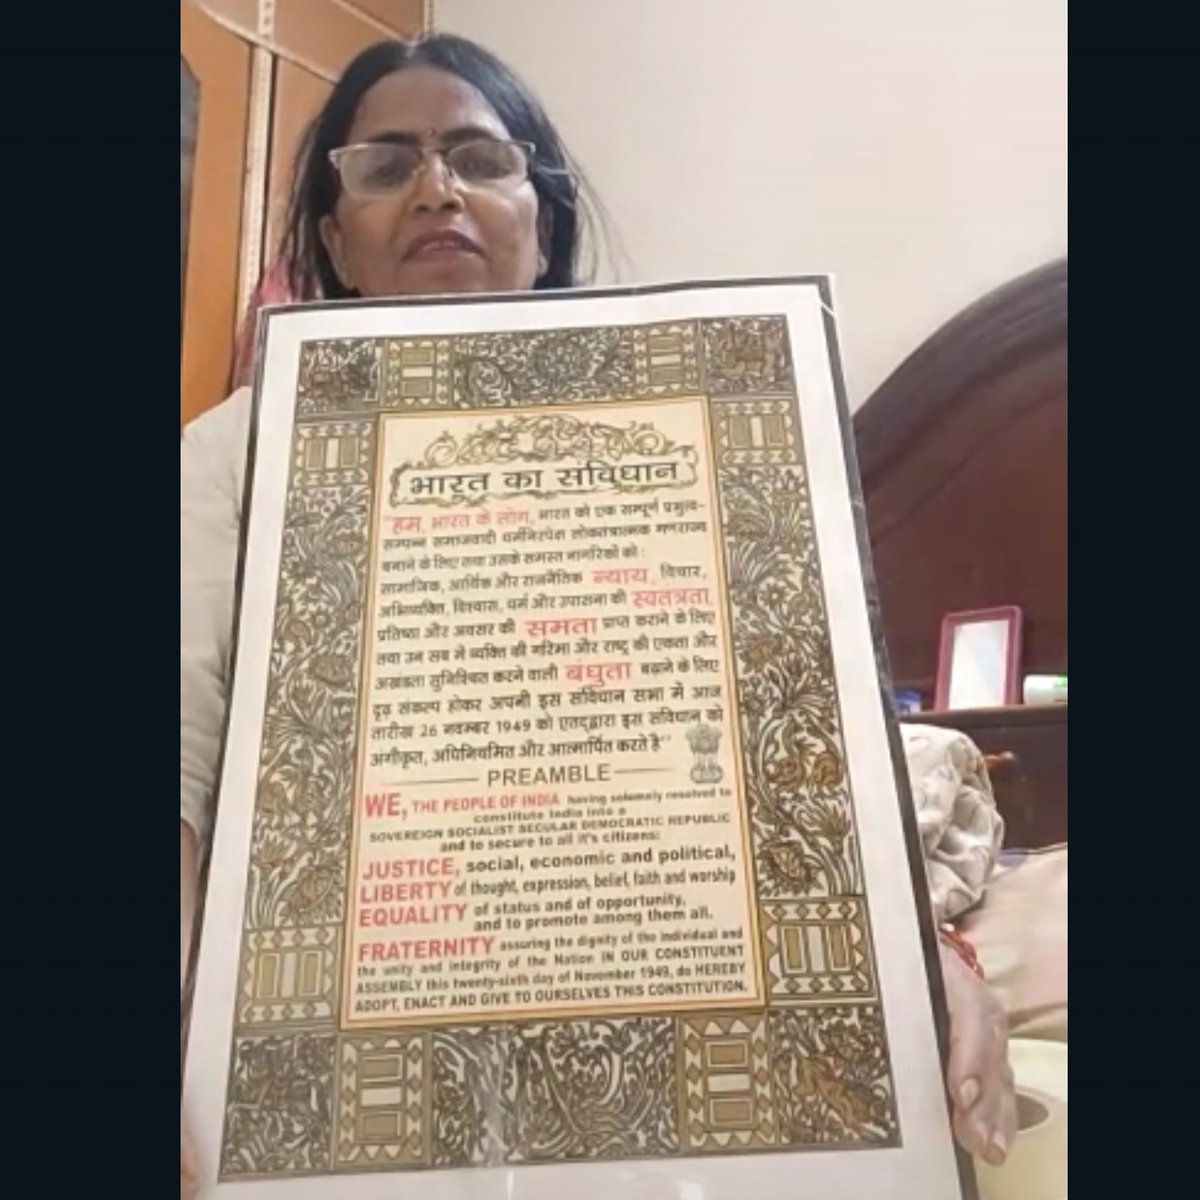 My mother was showing gifts she received on Ambedkar Jayanti through video call.
She said there are so many gifts that the house needs more space to keep them.😂

I am so happy to see the love & respect my parents received from the community. #EmotionalMoments

Jai Bhim #Ambedkar